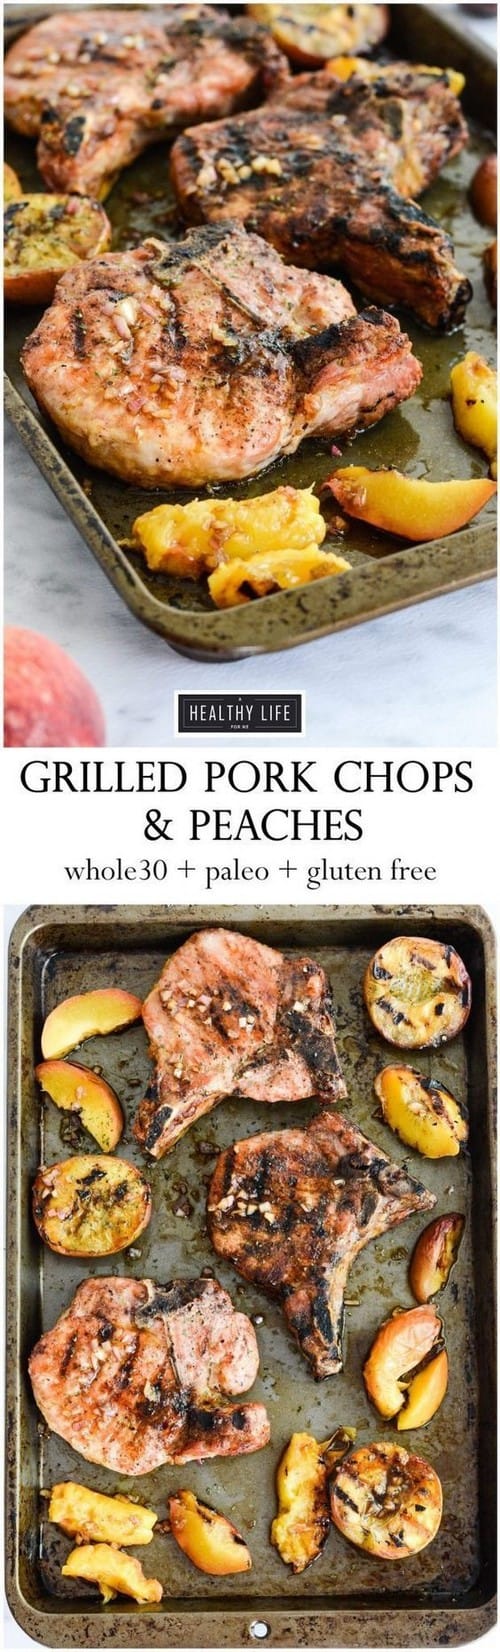 Whole30 Grilled Pork Chops and Peaches